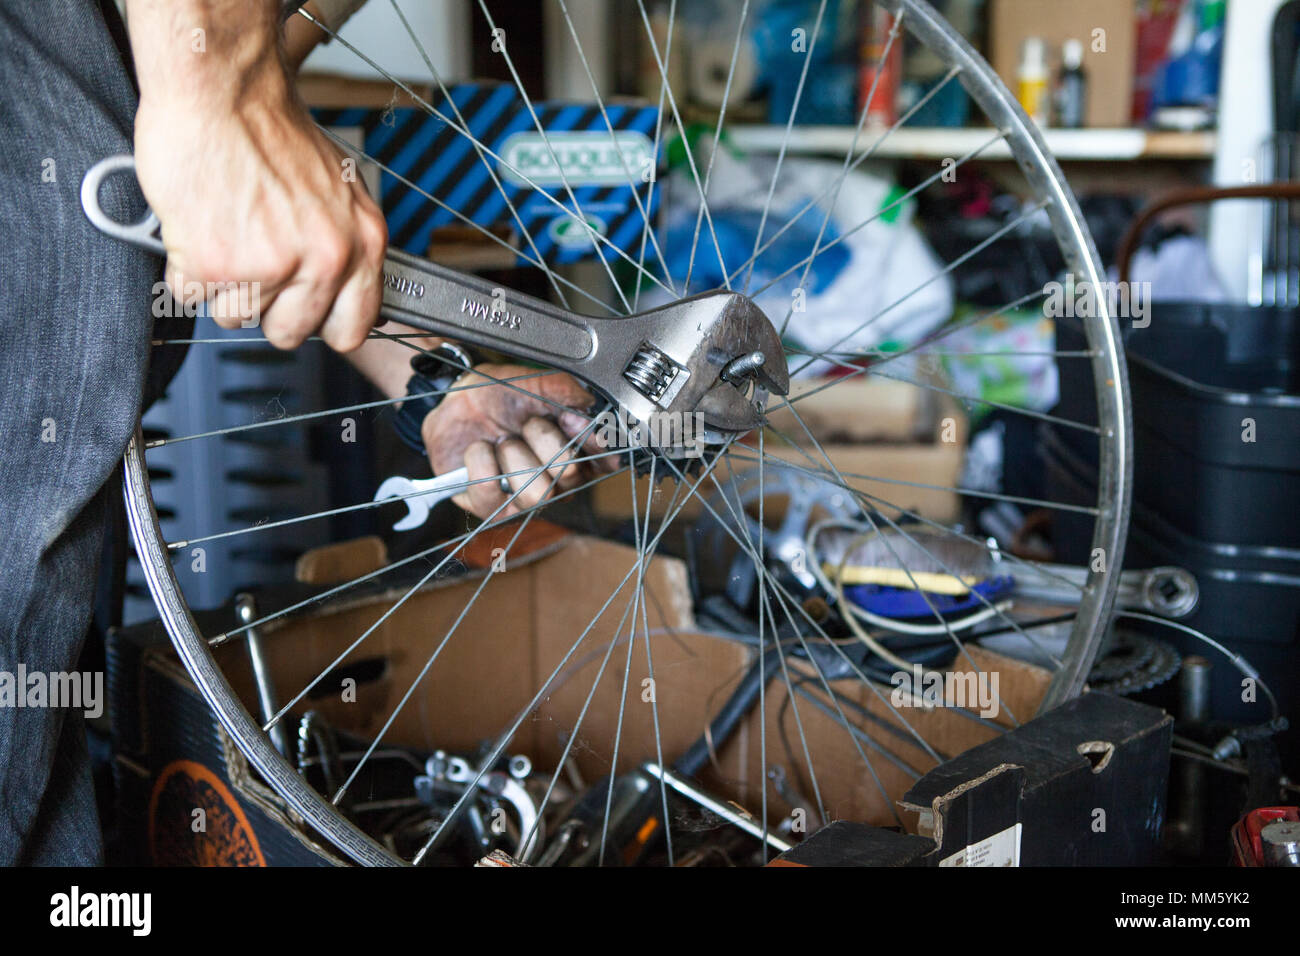 Close up on the hands of a man repairing a bicycle wheel with a wrench in rural France. Stock Photo